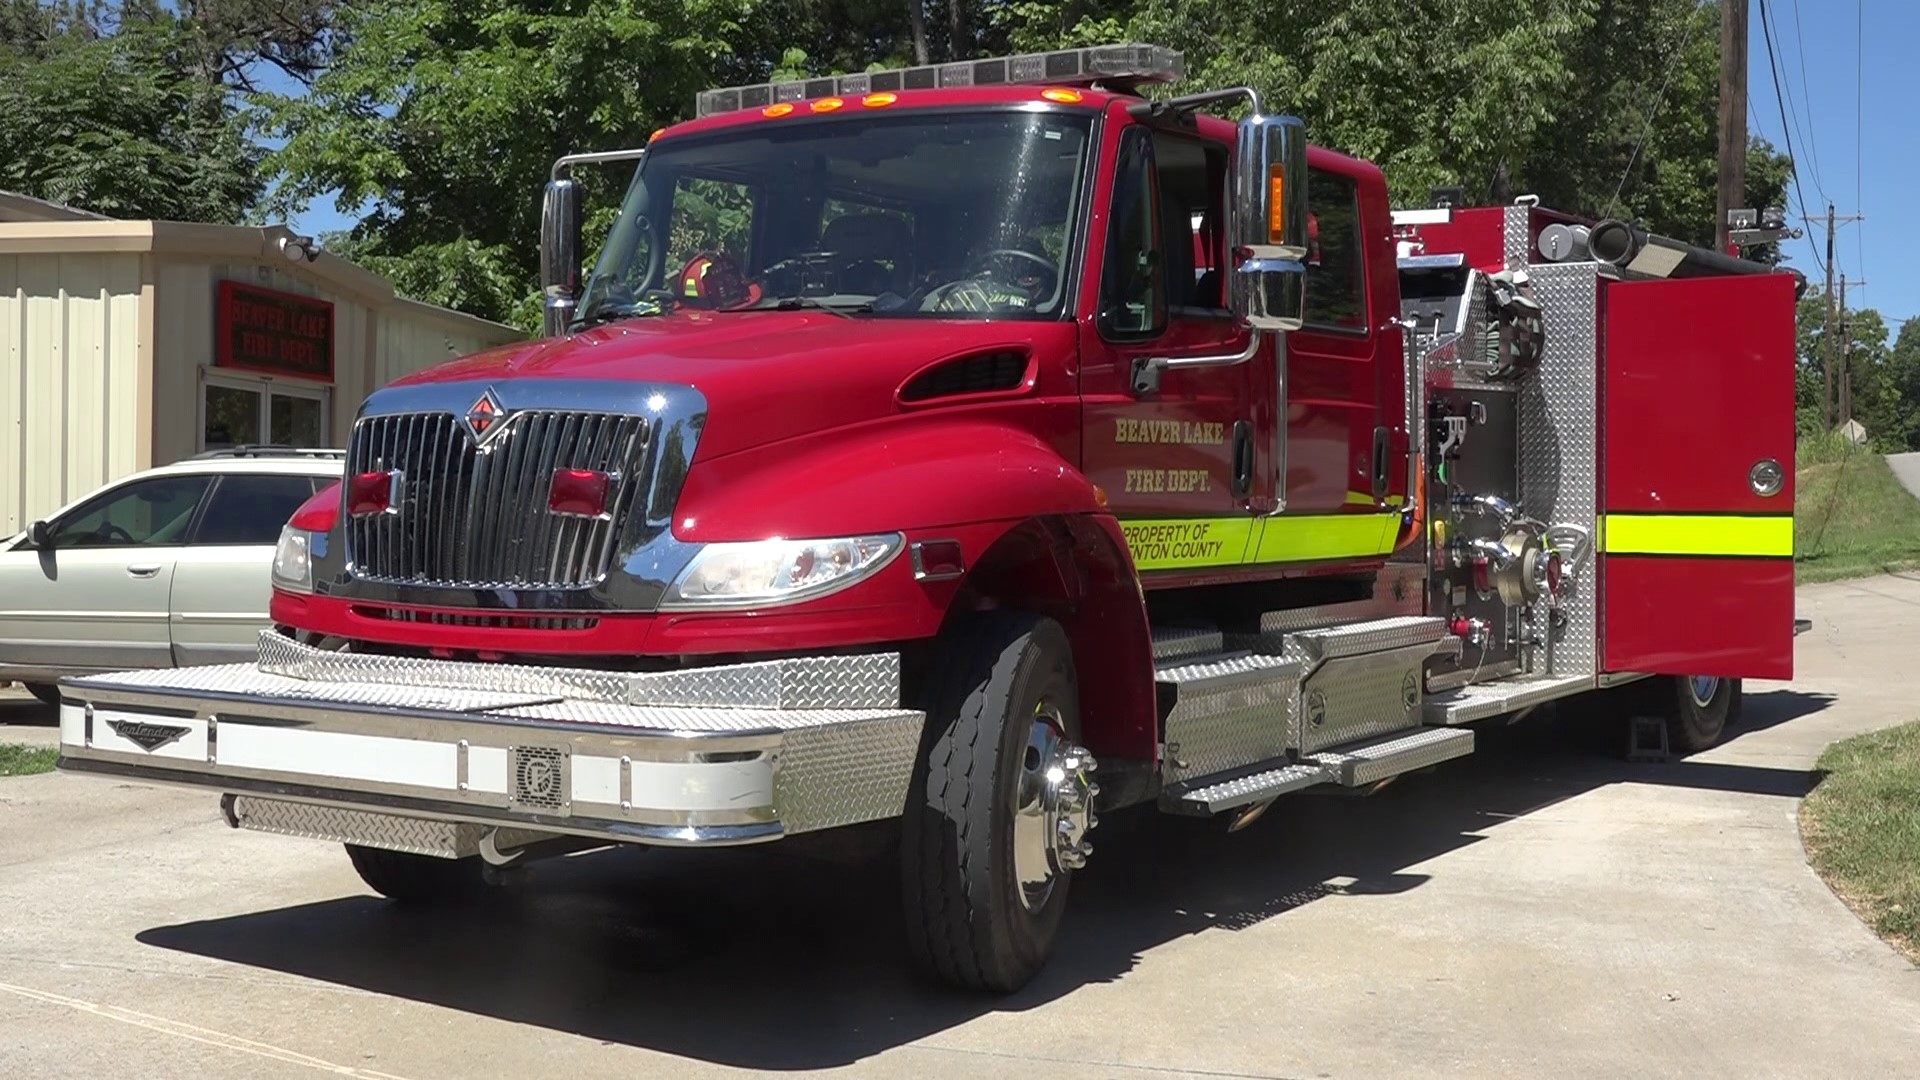 In light of staffing cuts, the Beaver Lake Fire Department turned to the community for help.